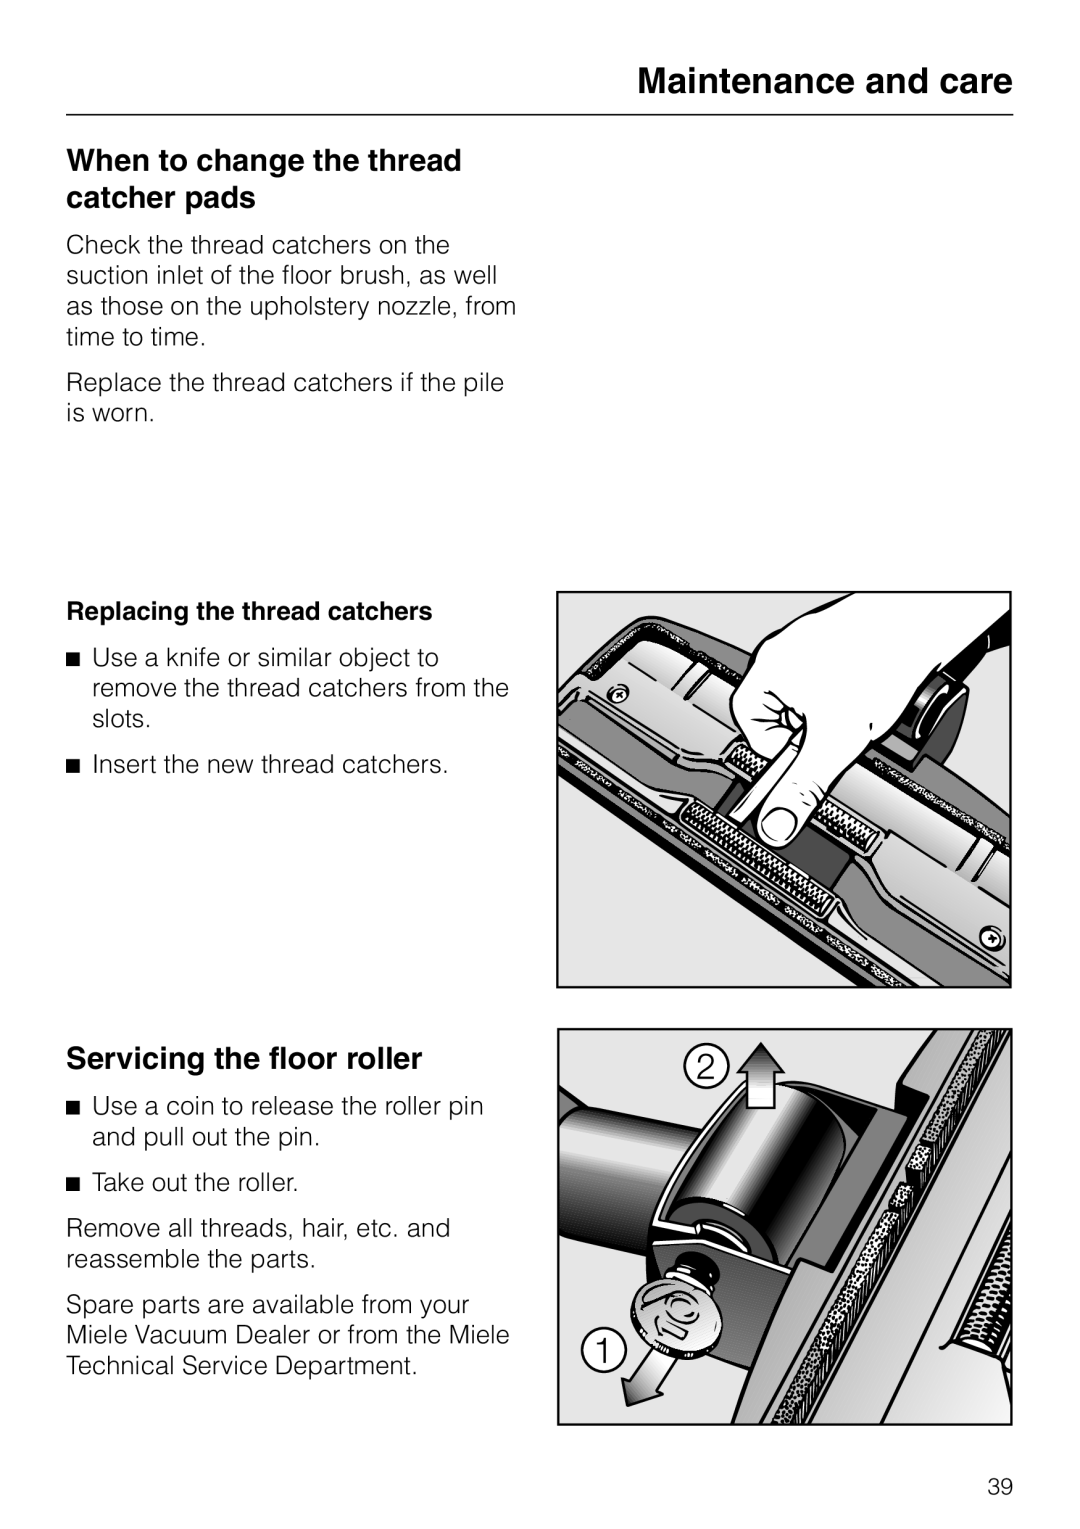 Miele S 500, S 600, S 648, S 548 Maintenance and care, When to change the thread catcher pads, Servicing the floor roller 